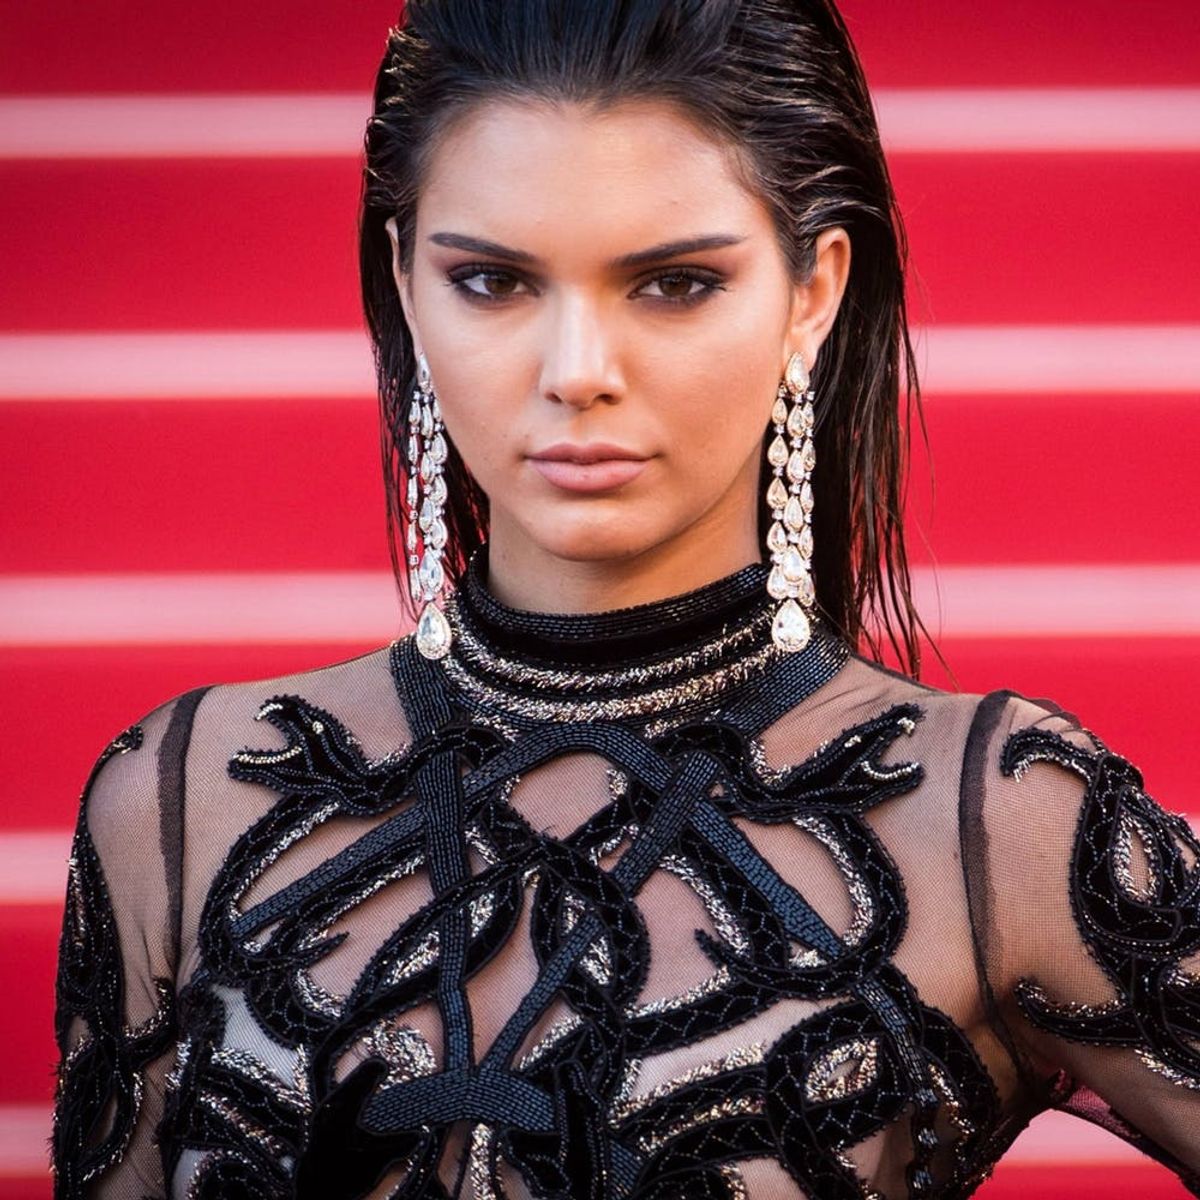 Was Kendall Jenner Banned from Uber?